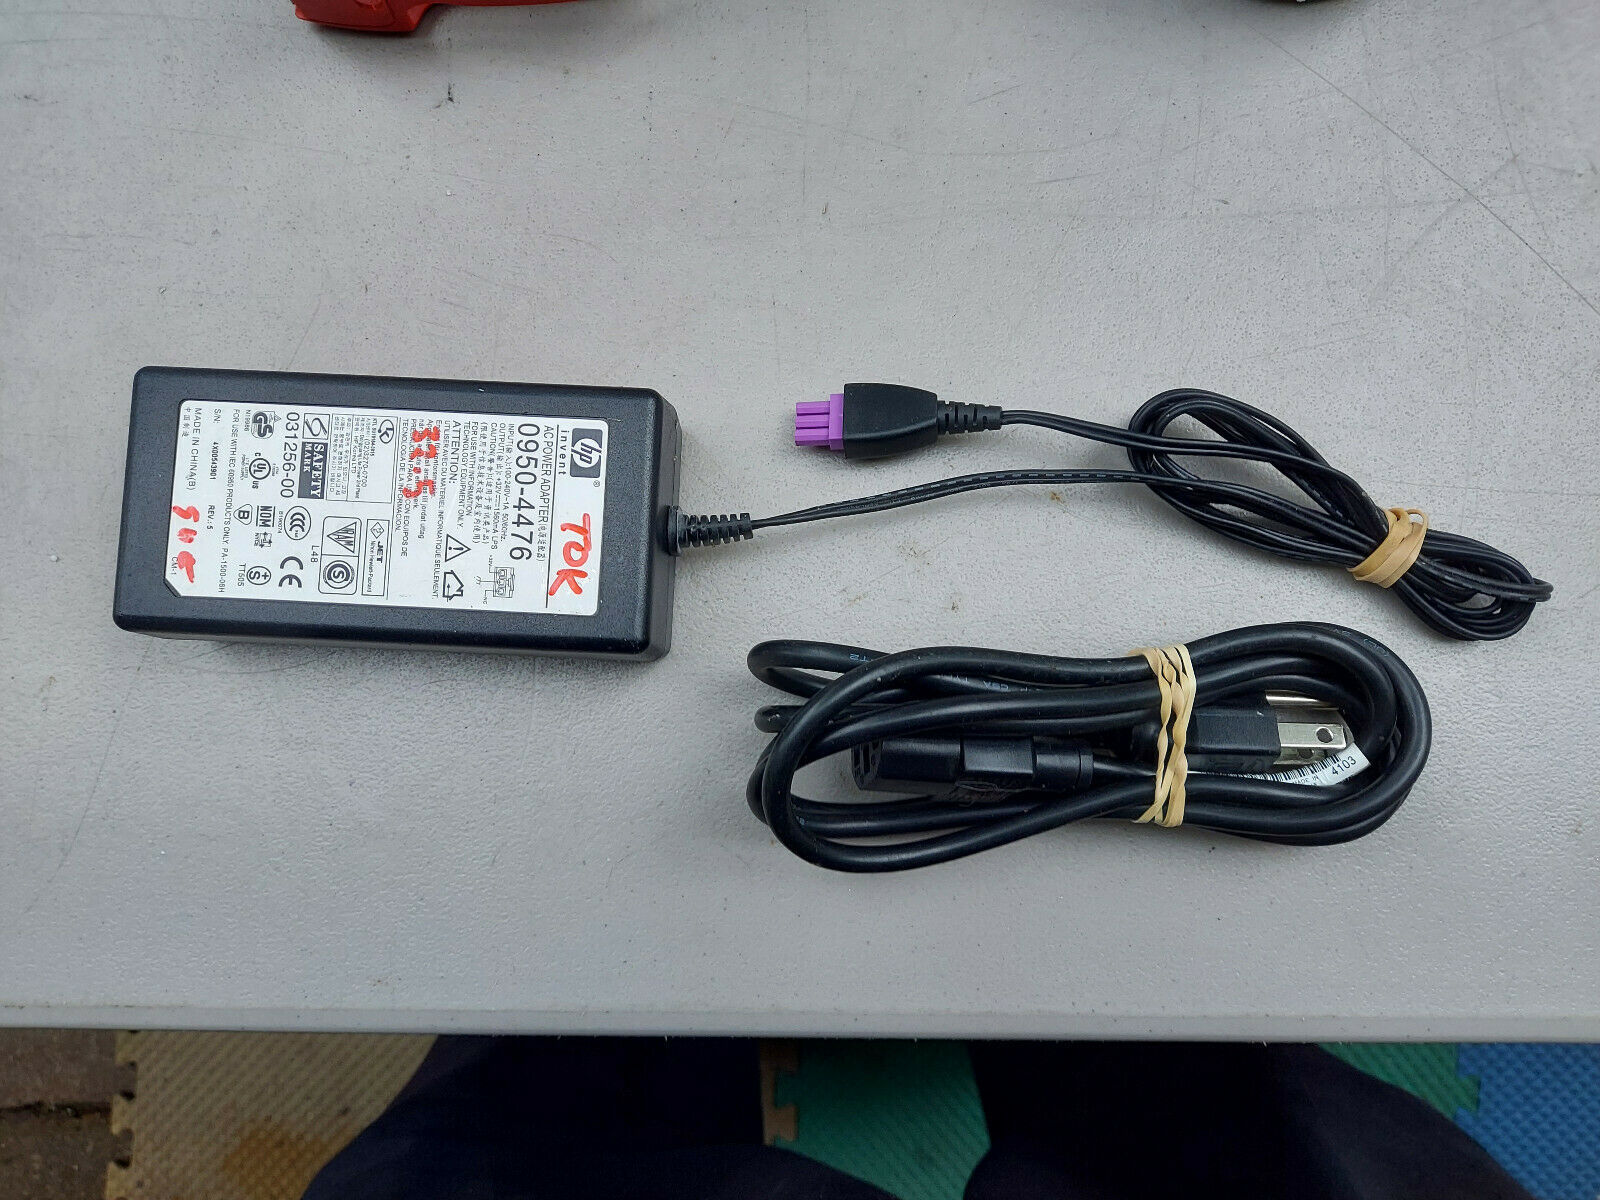 Primary image for 21SS33 HP POWER SUPPLY 0950-4476, UNIVERSAL --> 32VDC / 1560MA (32.5 VNL), VGC